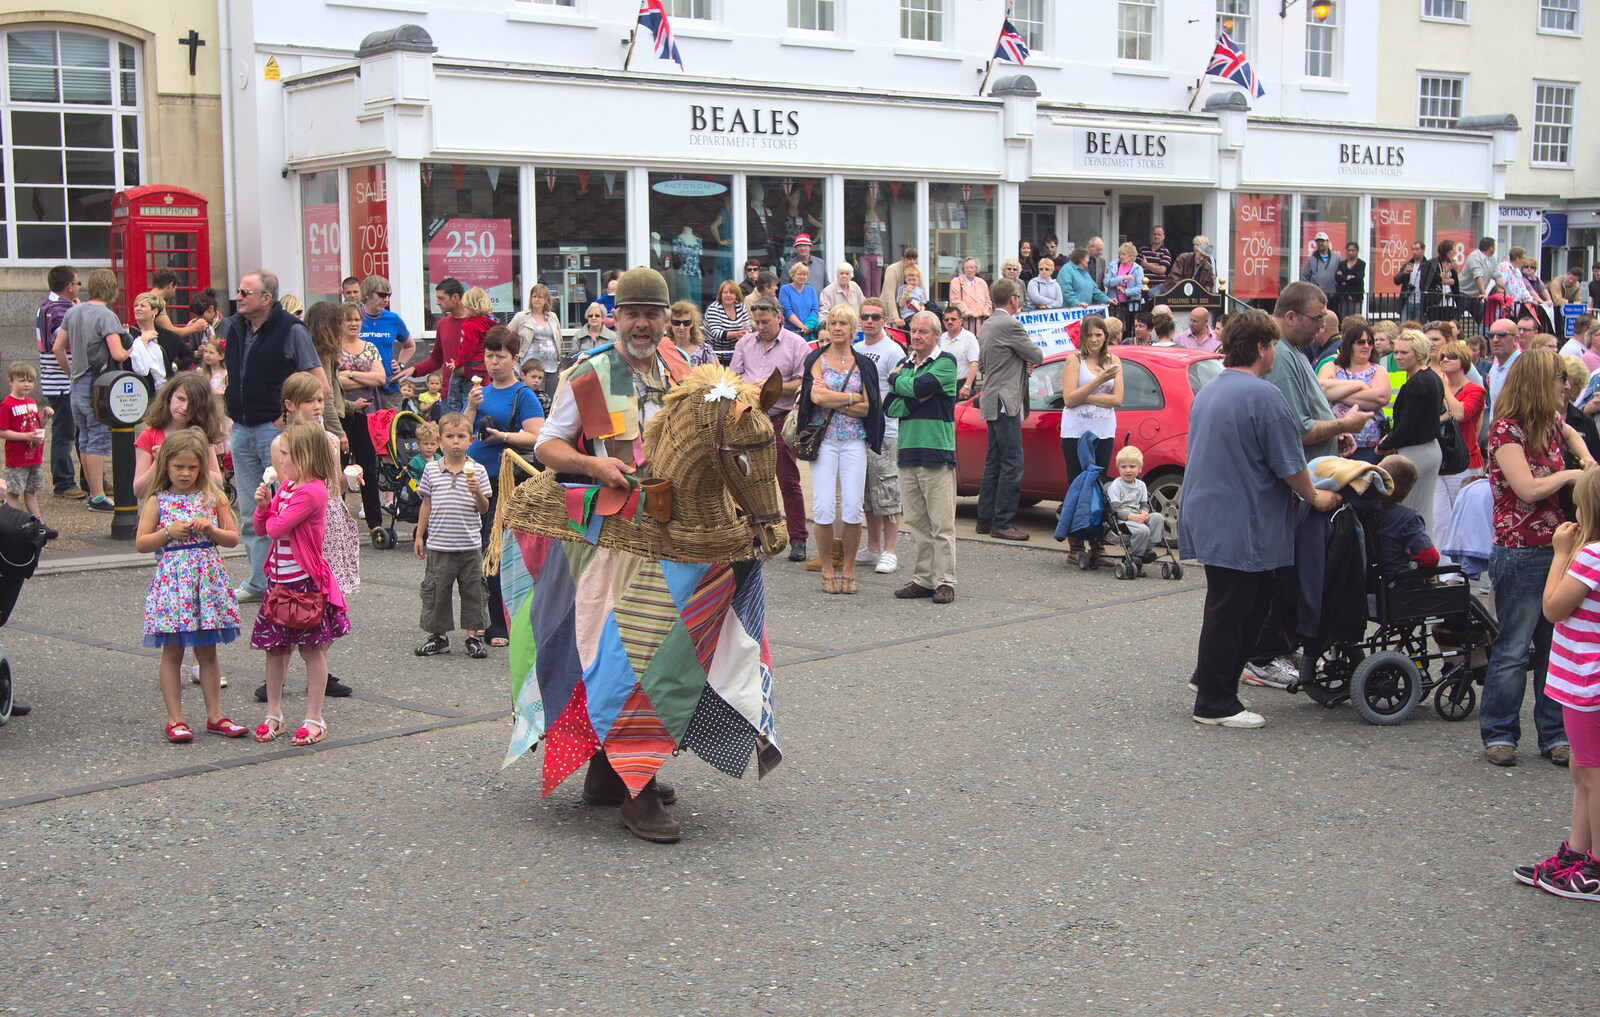 The crowds outside Beales from Morris Dancing and a Carnival Procession, Diss, Norfolk - 17th June 2012